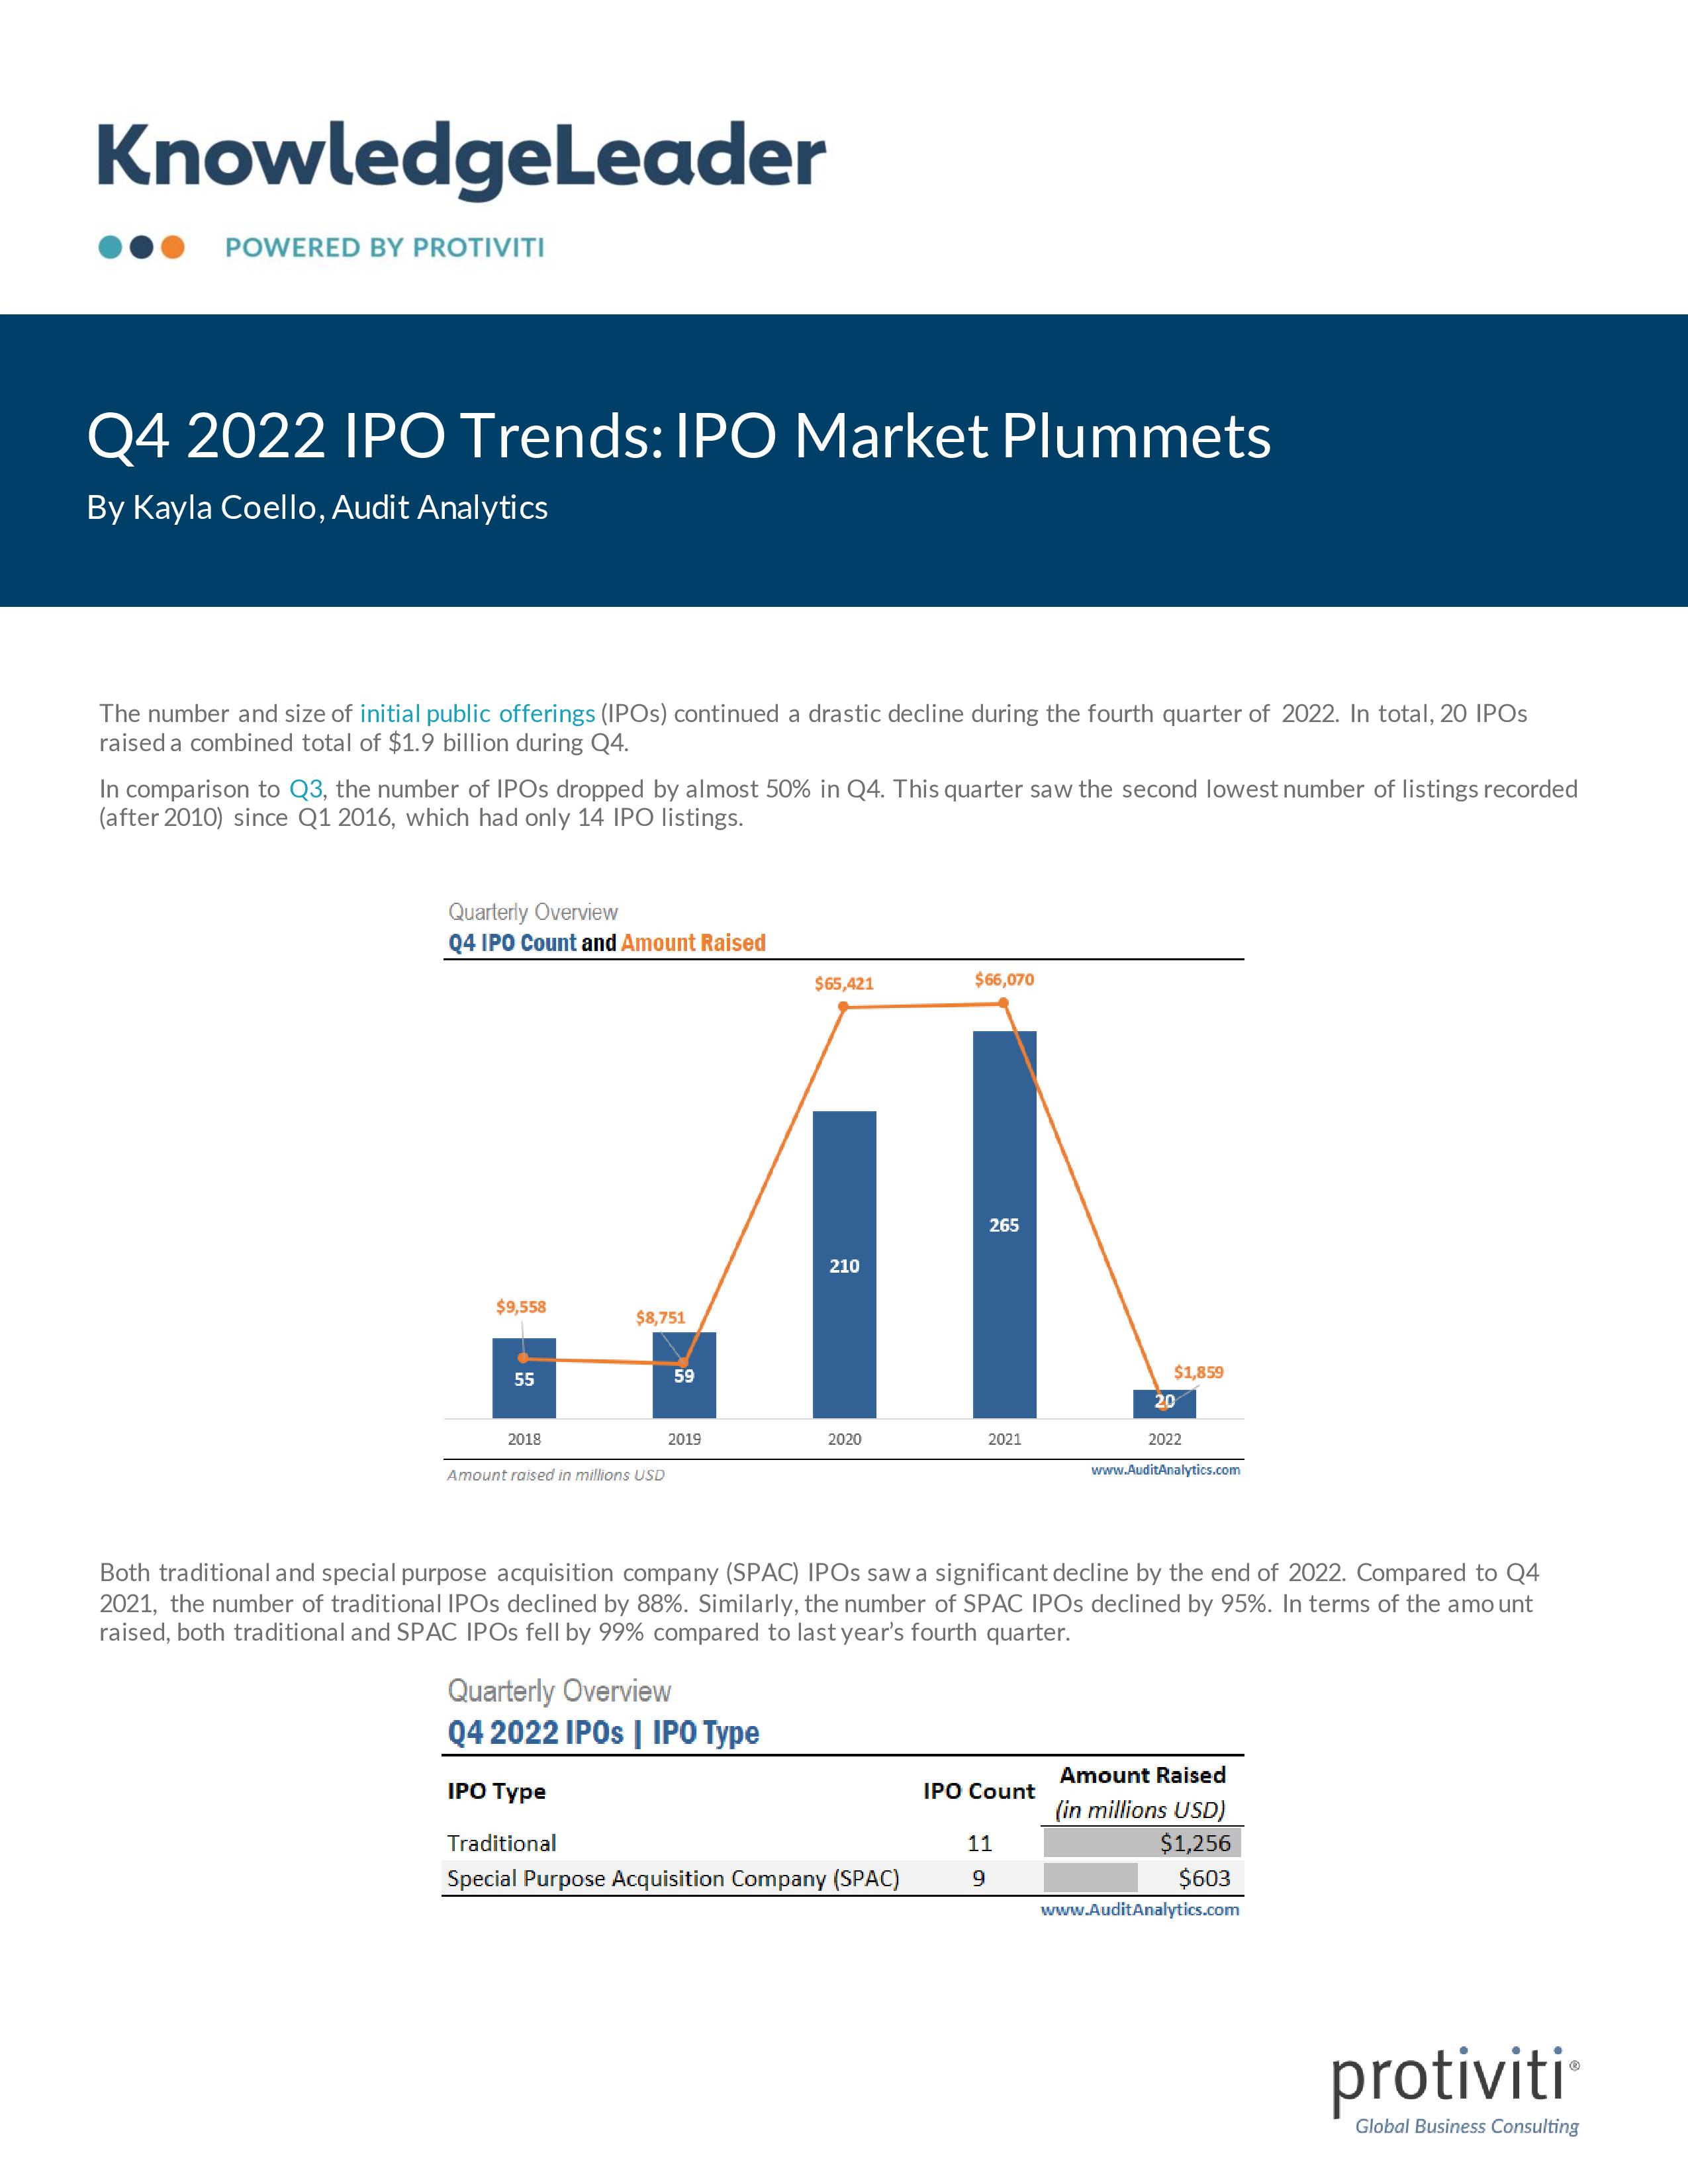 Screenshot of the first page of Q4 2022 IPO Trends IPO Market Plummets